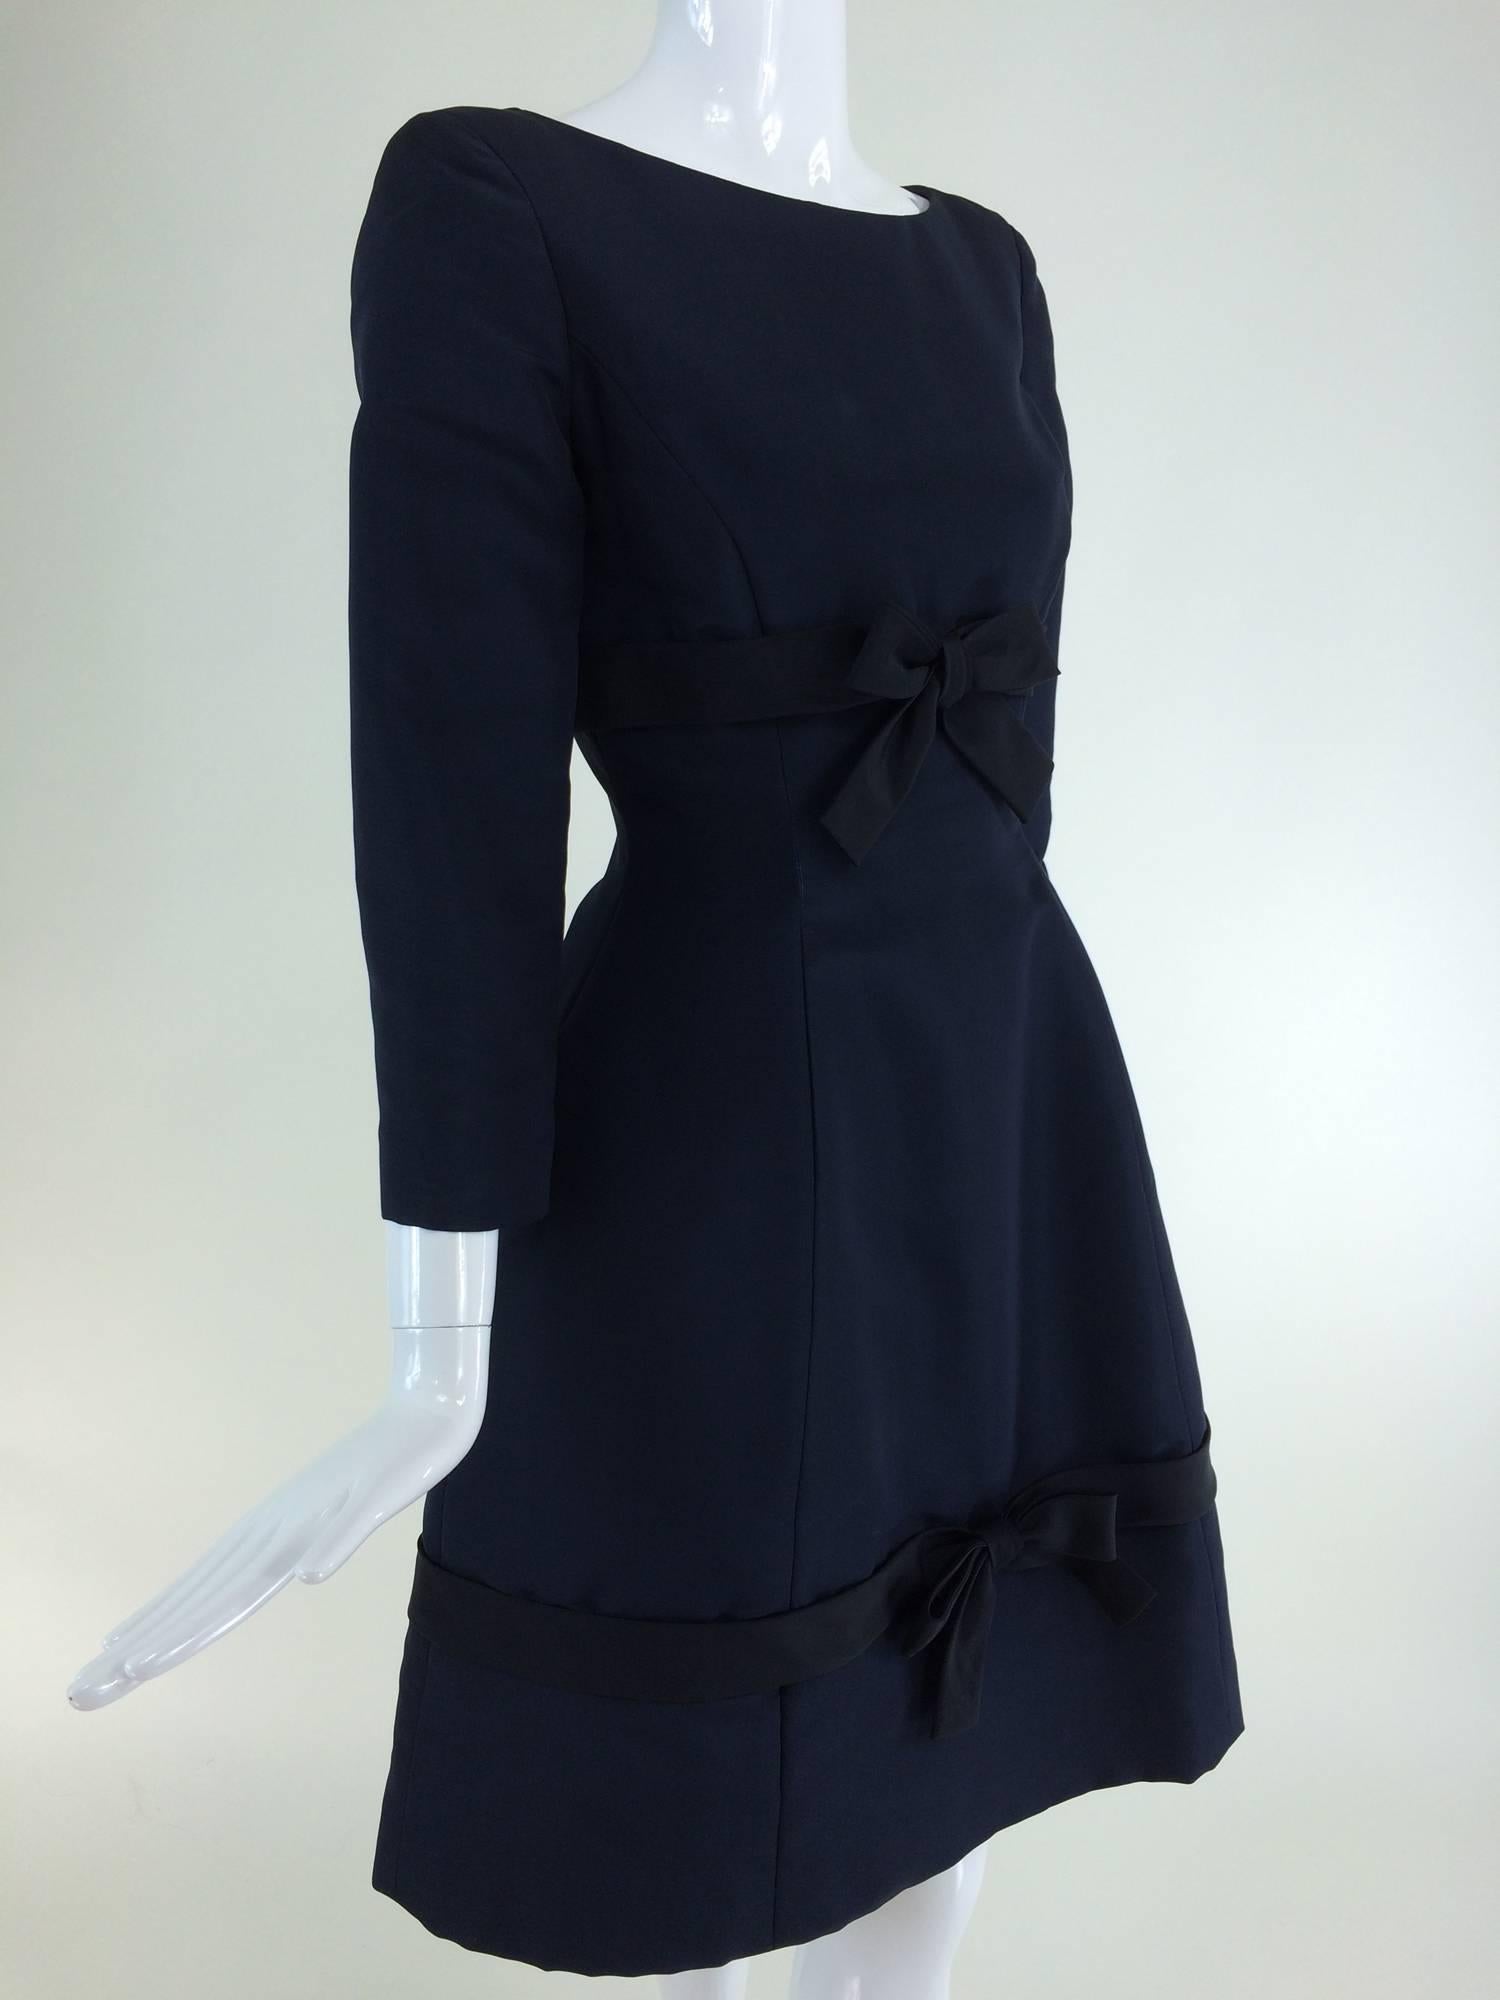 Oscar de la Renta classic navy blue silk bow front dress from the late 1960s...Bateau neck dress with princess seams has bracelet length sleeves, an applied black silk band under the bust with a bow tie at the front, the skirt is bell shaped with a